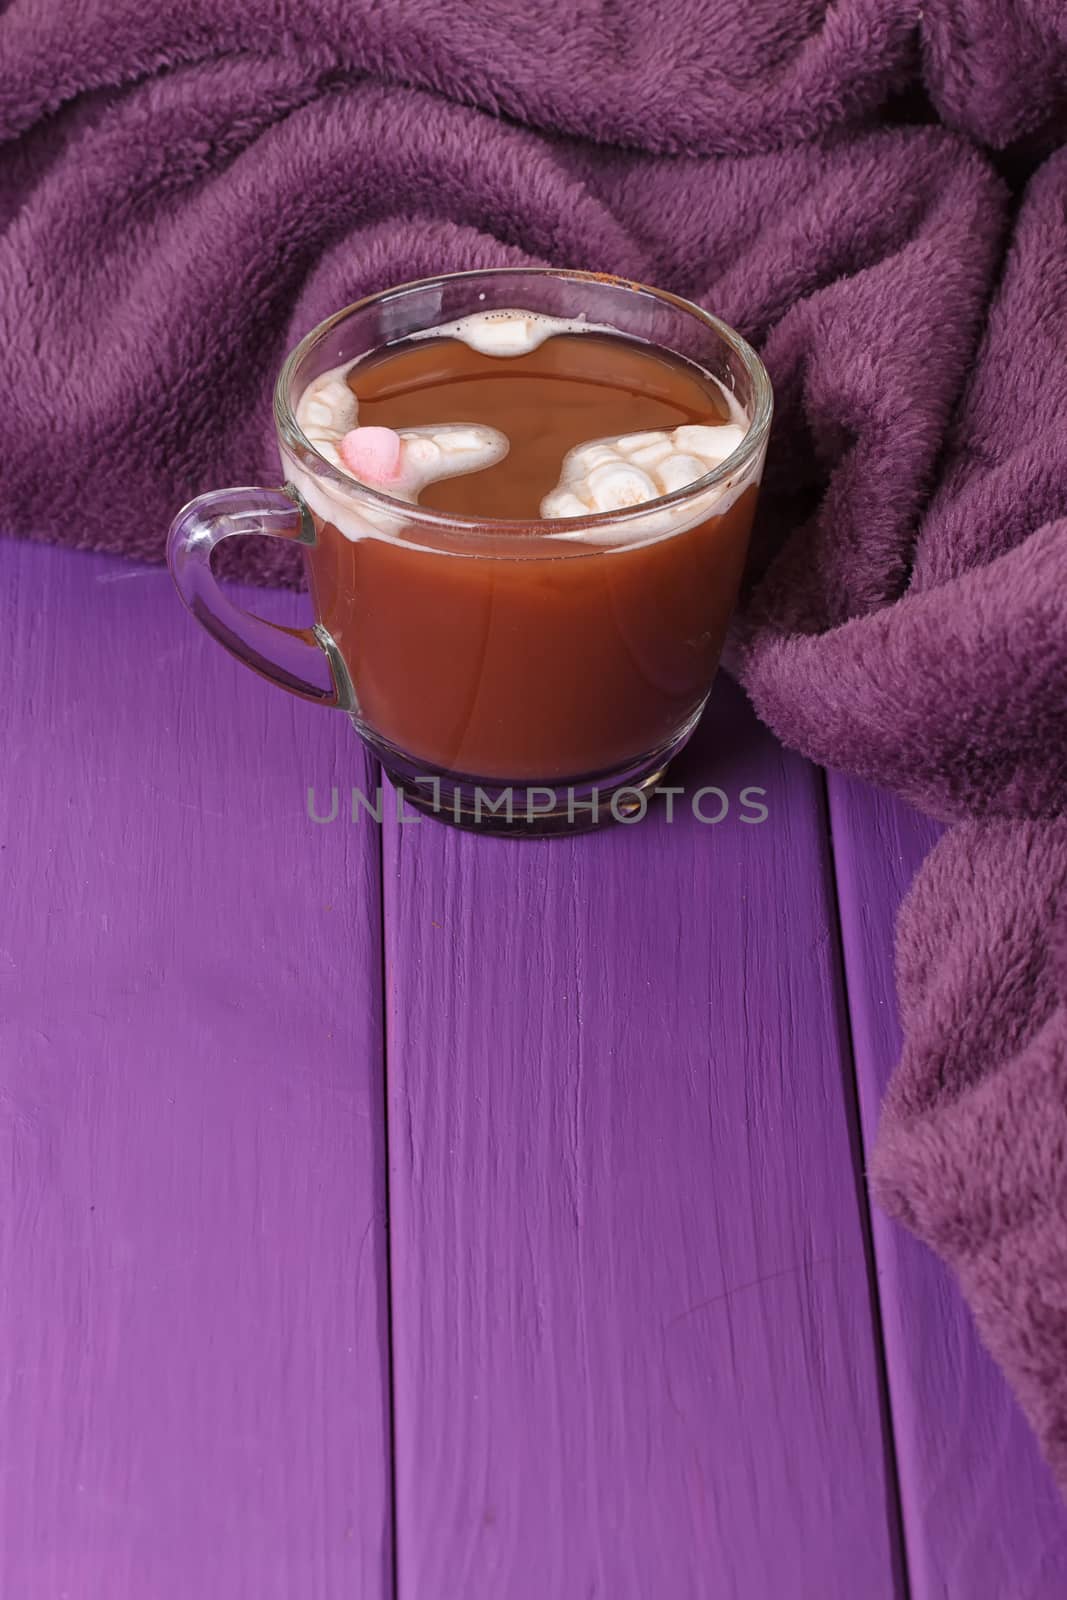 Hot Cocoa or chocolate, cozy knitted blanket. Winter still life.